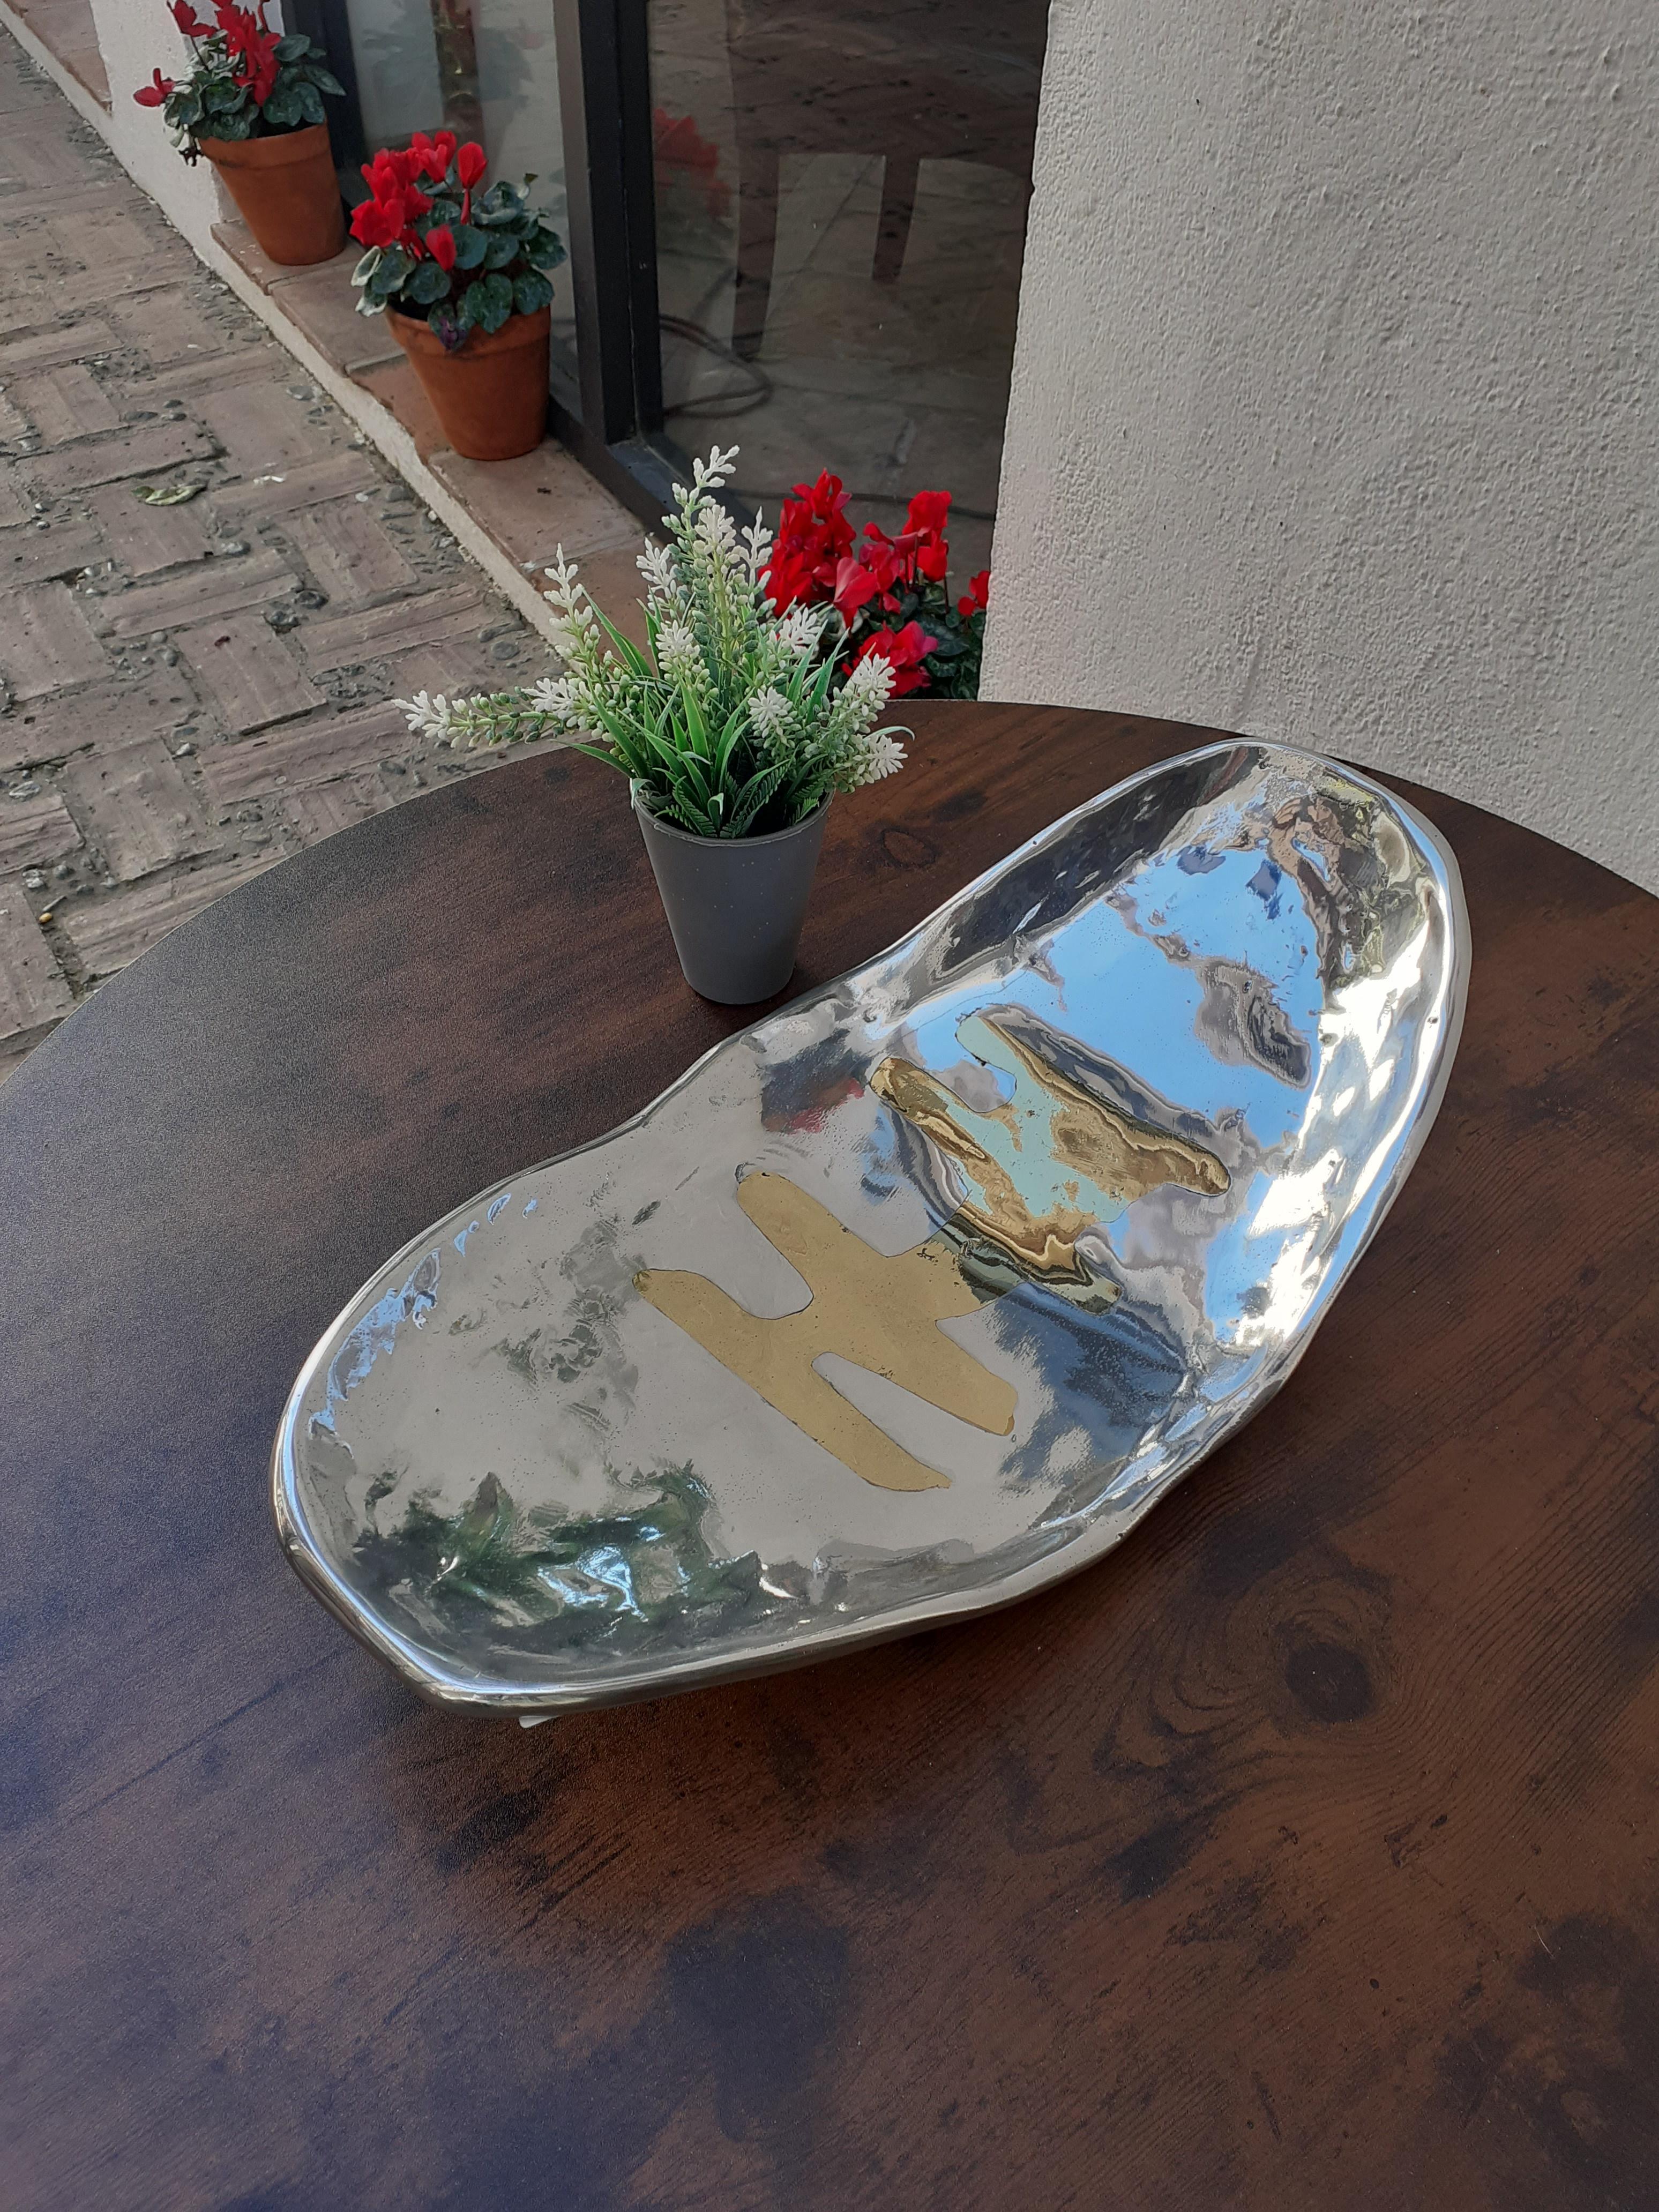 The Bowl was created by David Marshall, from sand cast aluminium and brass.
 We use recycled materials all our pieces are handmade, mounted and finished in our foundry and workshop in Spain.
It is certified authentic by the Artist David Marshall